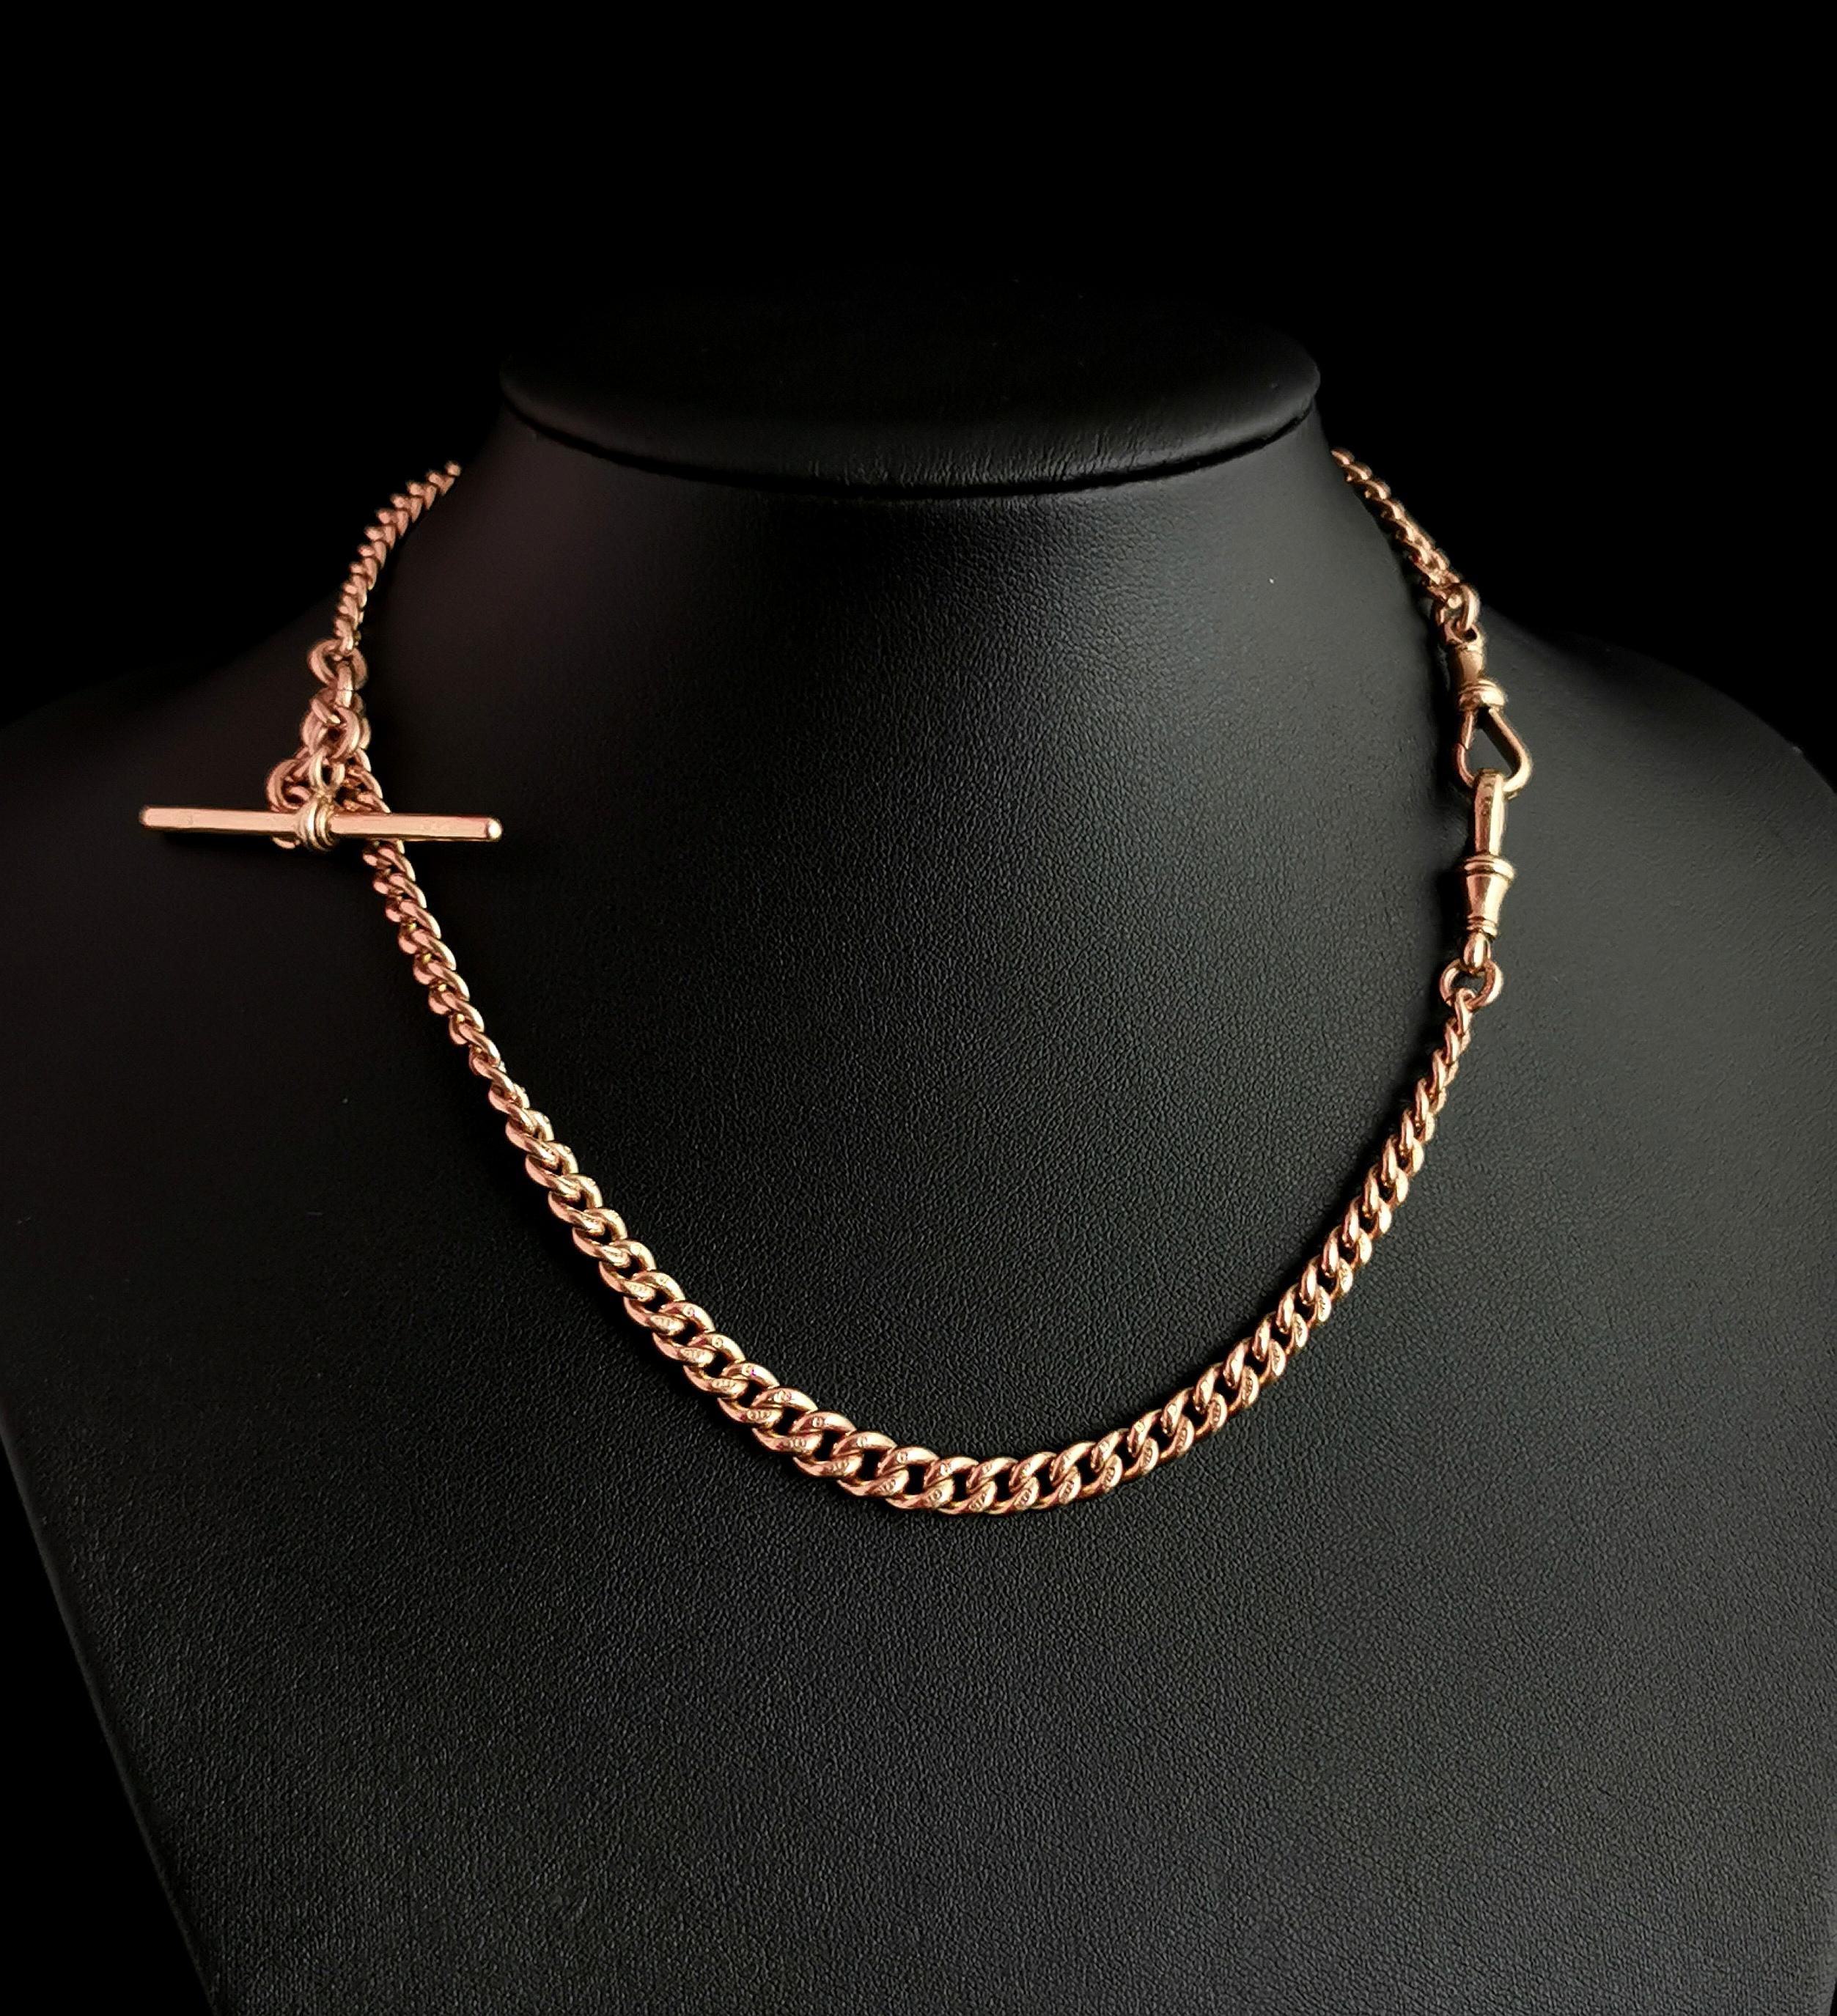 Antique 9k Rose Gold Albert Chain, Watch Chain Necklace, Curb Link 7